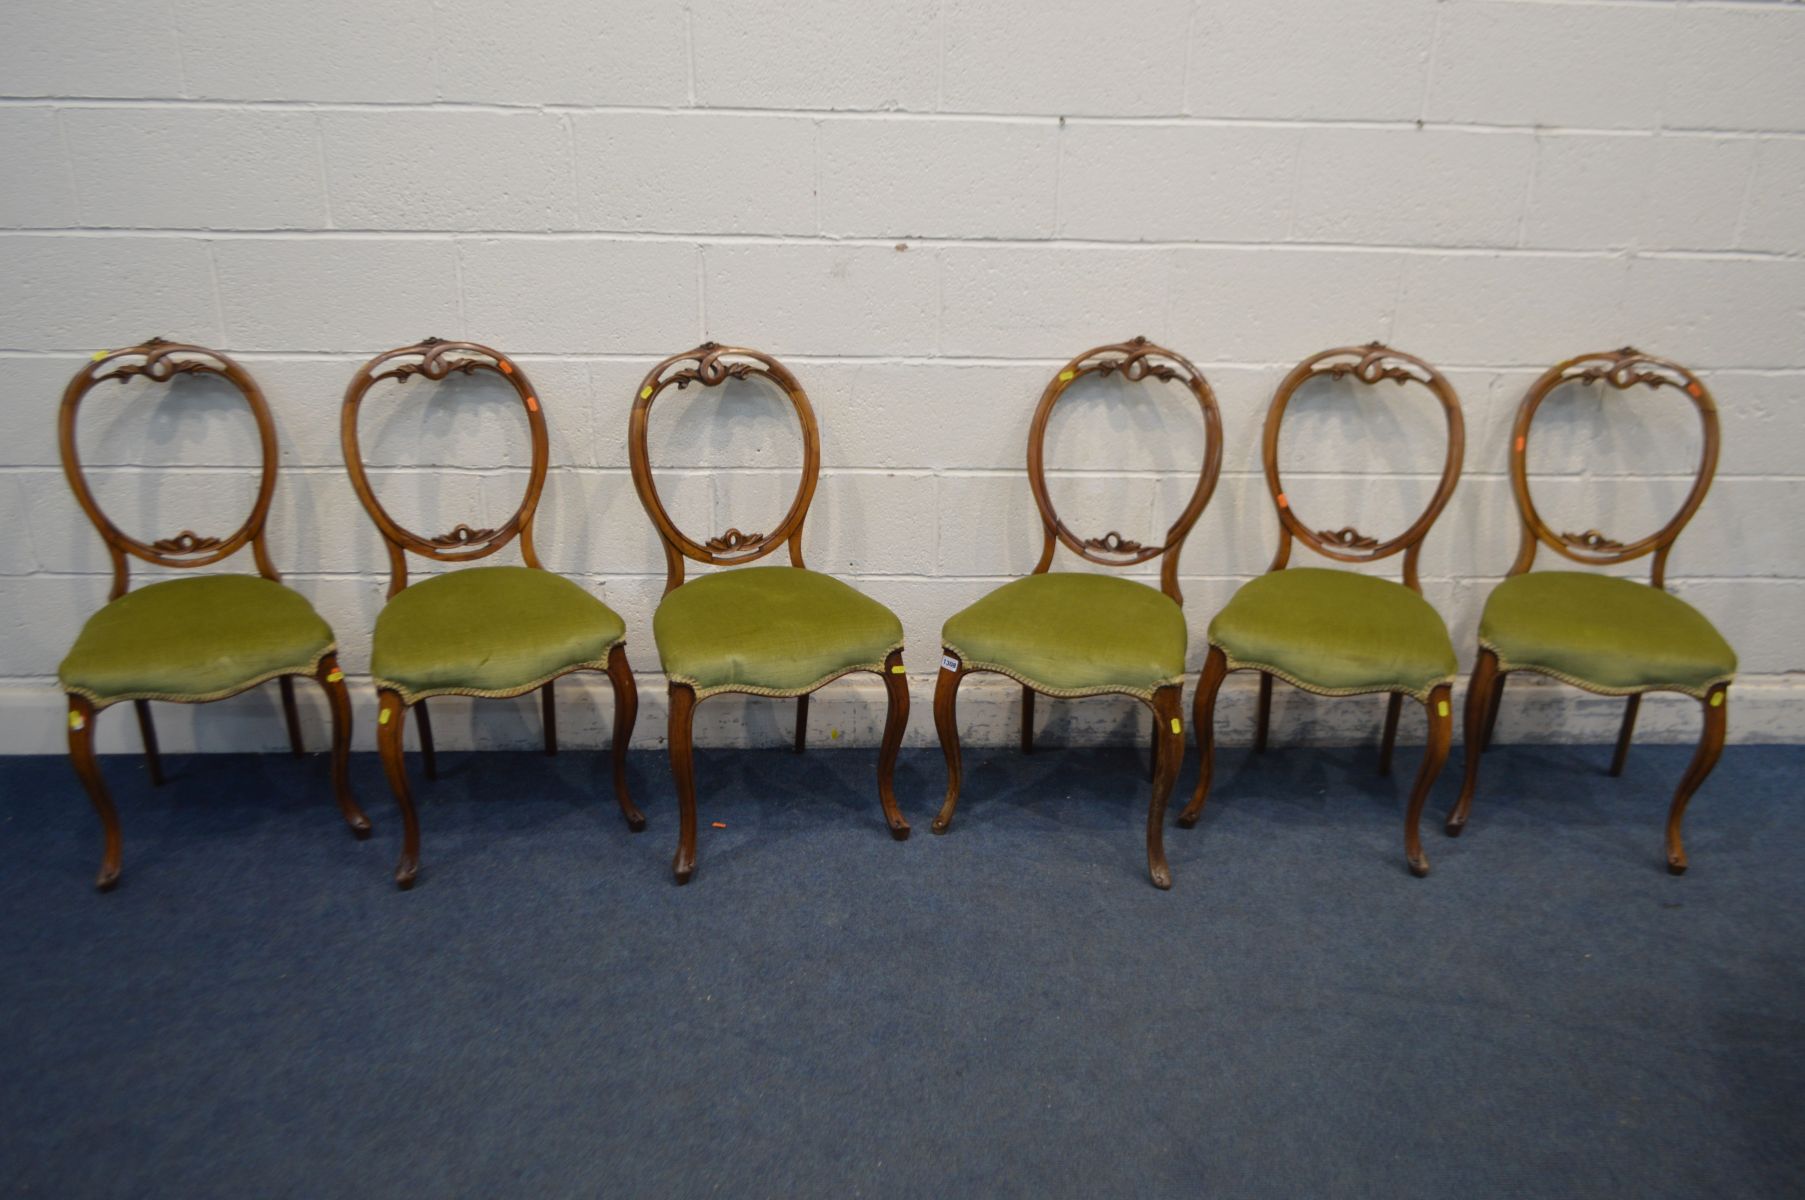 A SET OF SIX VICTORIAN WALNUT BALLON BACK CHAIRS, with foliate cresting rail, green upholstered seat